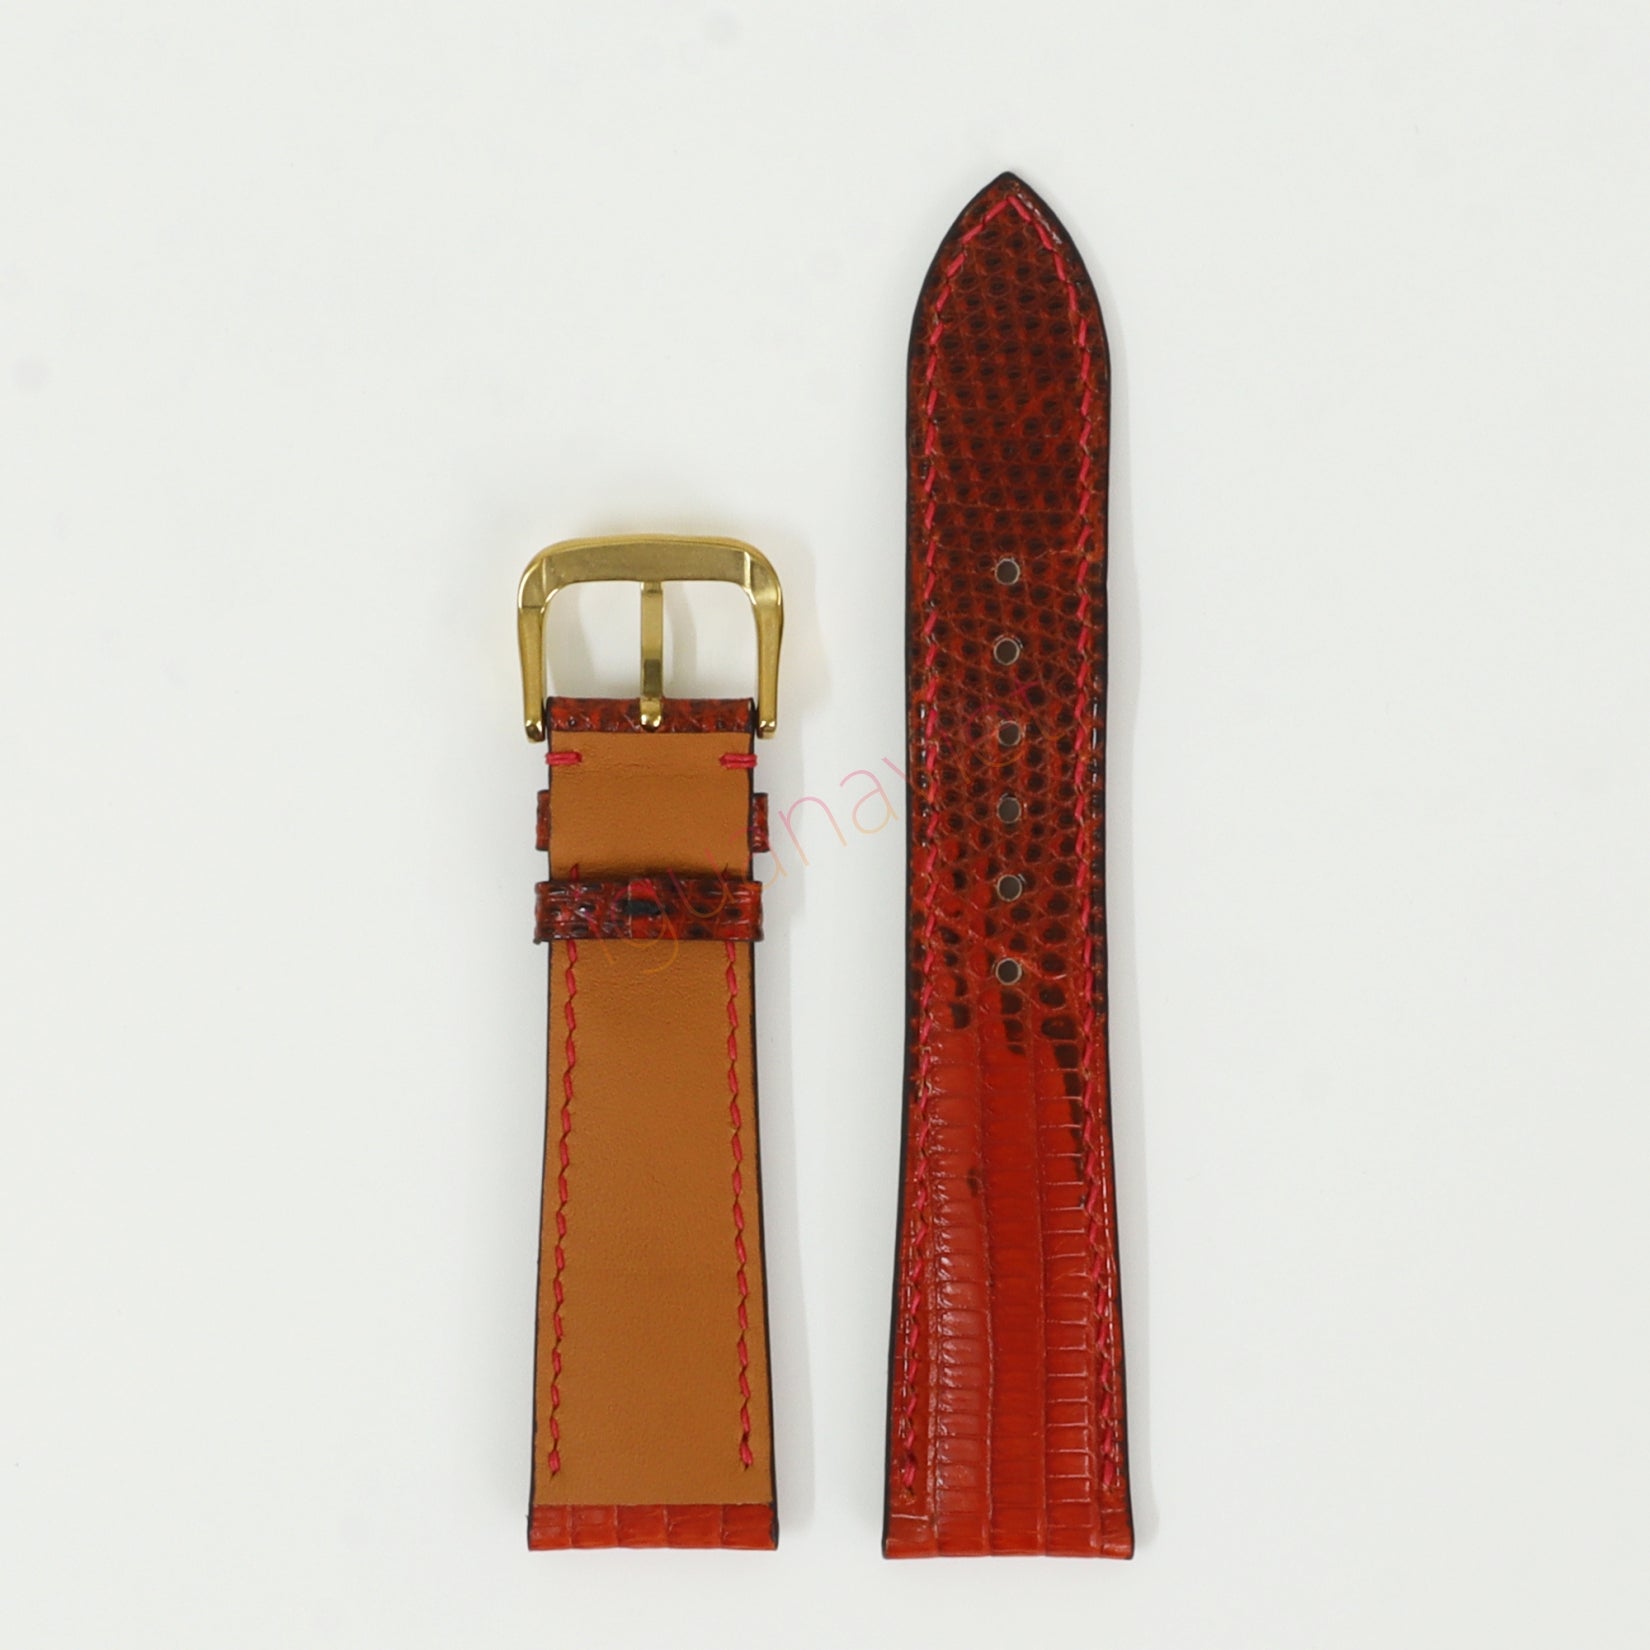 Red Genuine iguana leather watch strap with deployment buckle, quick release pin leather watch strap, handmade leather watch strap